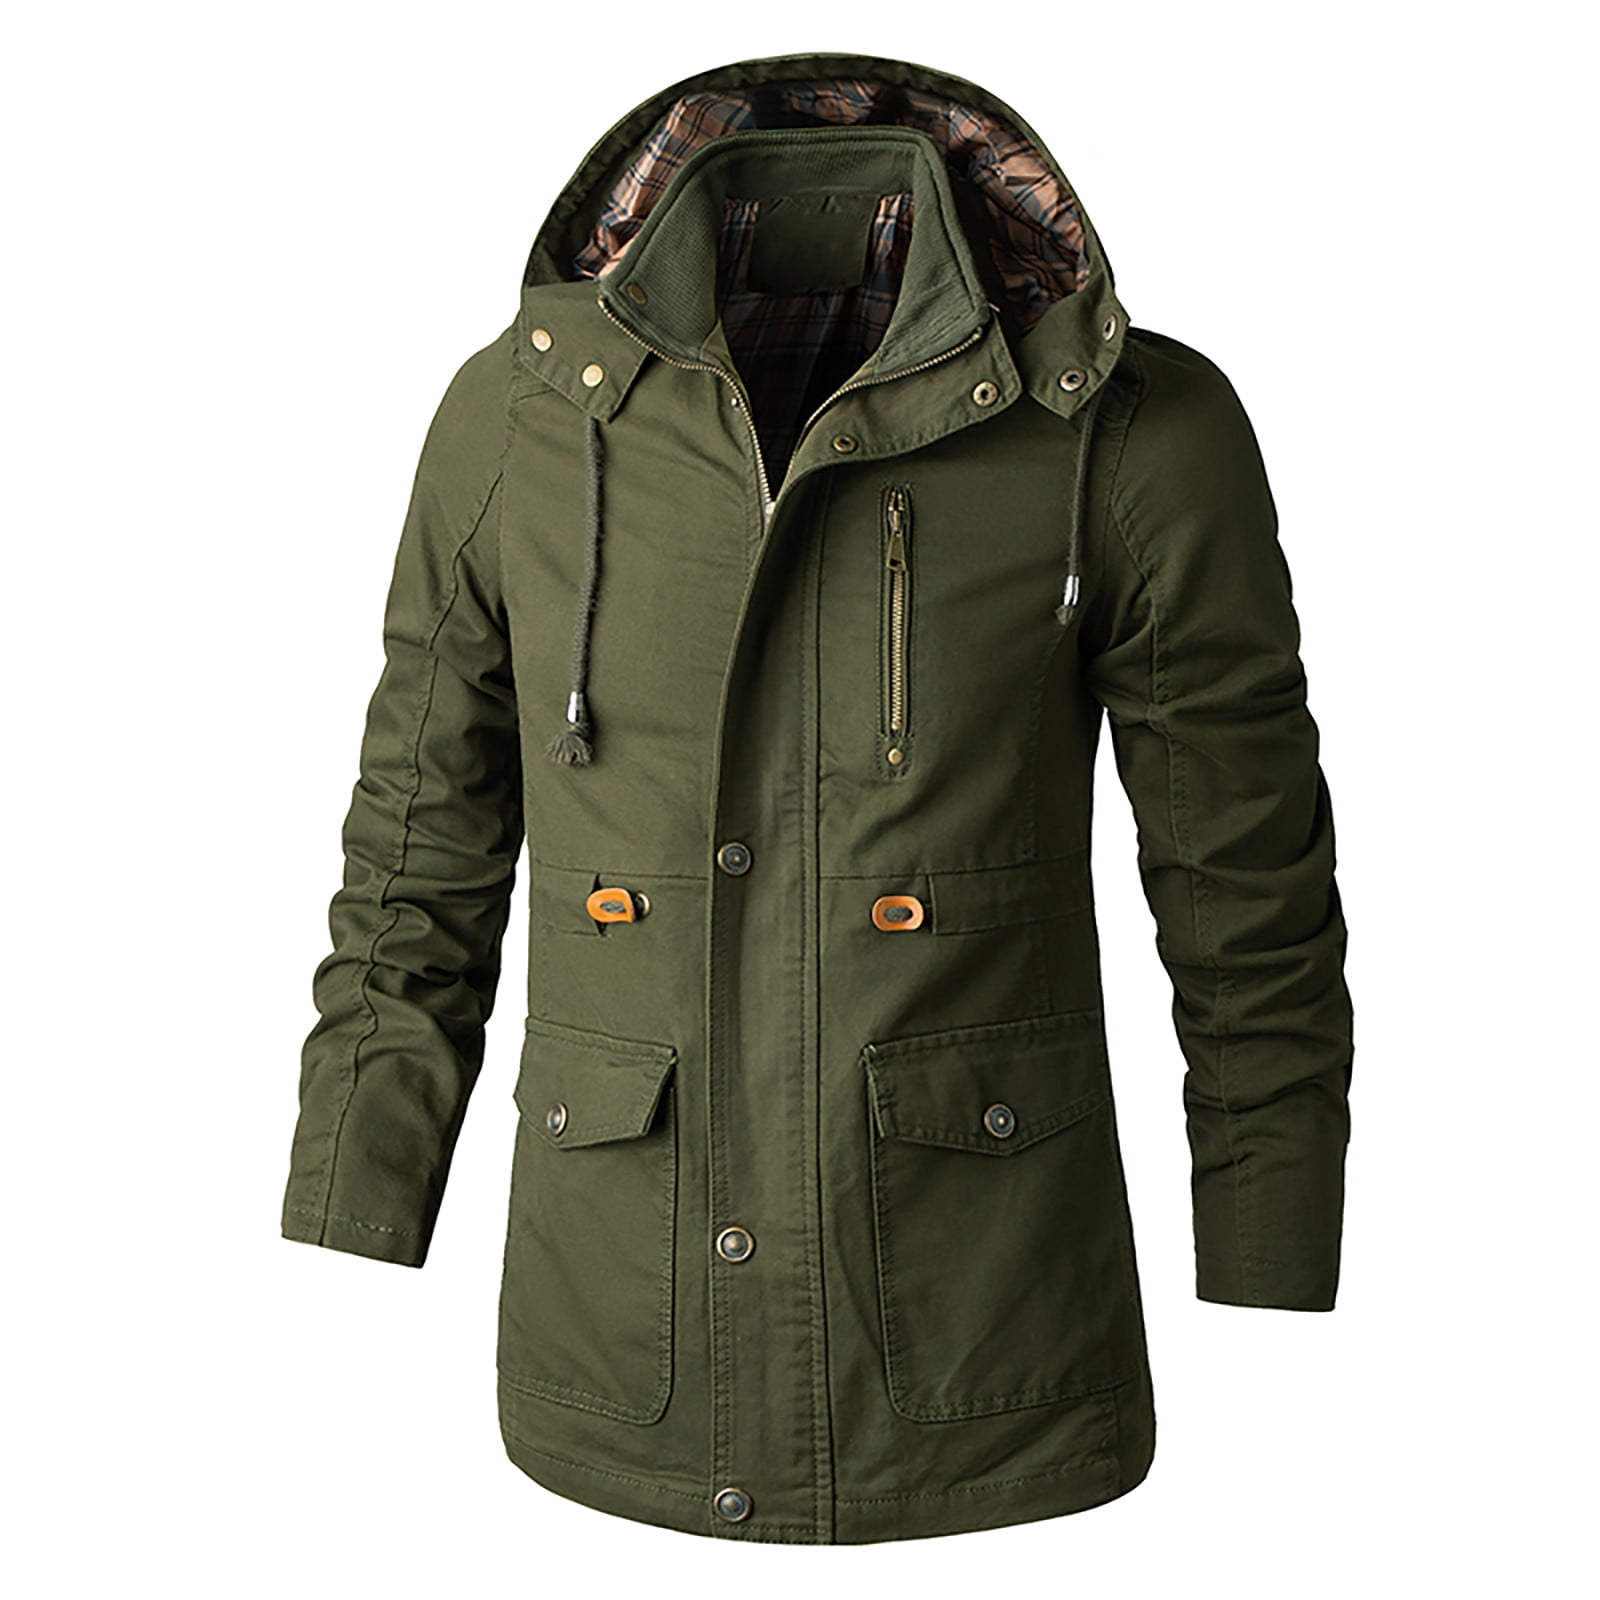 Landscap Mens Autumn Winter Warm Military Jacket Mid-Length Thickened Multi-Pocket Hooded Outwear Coat